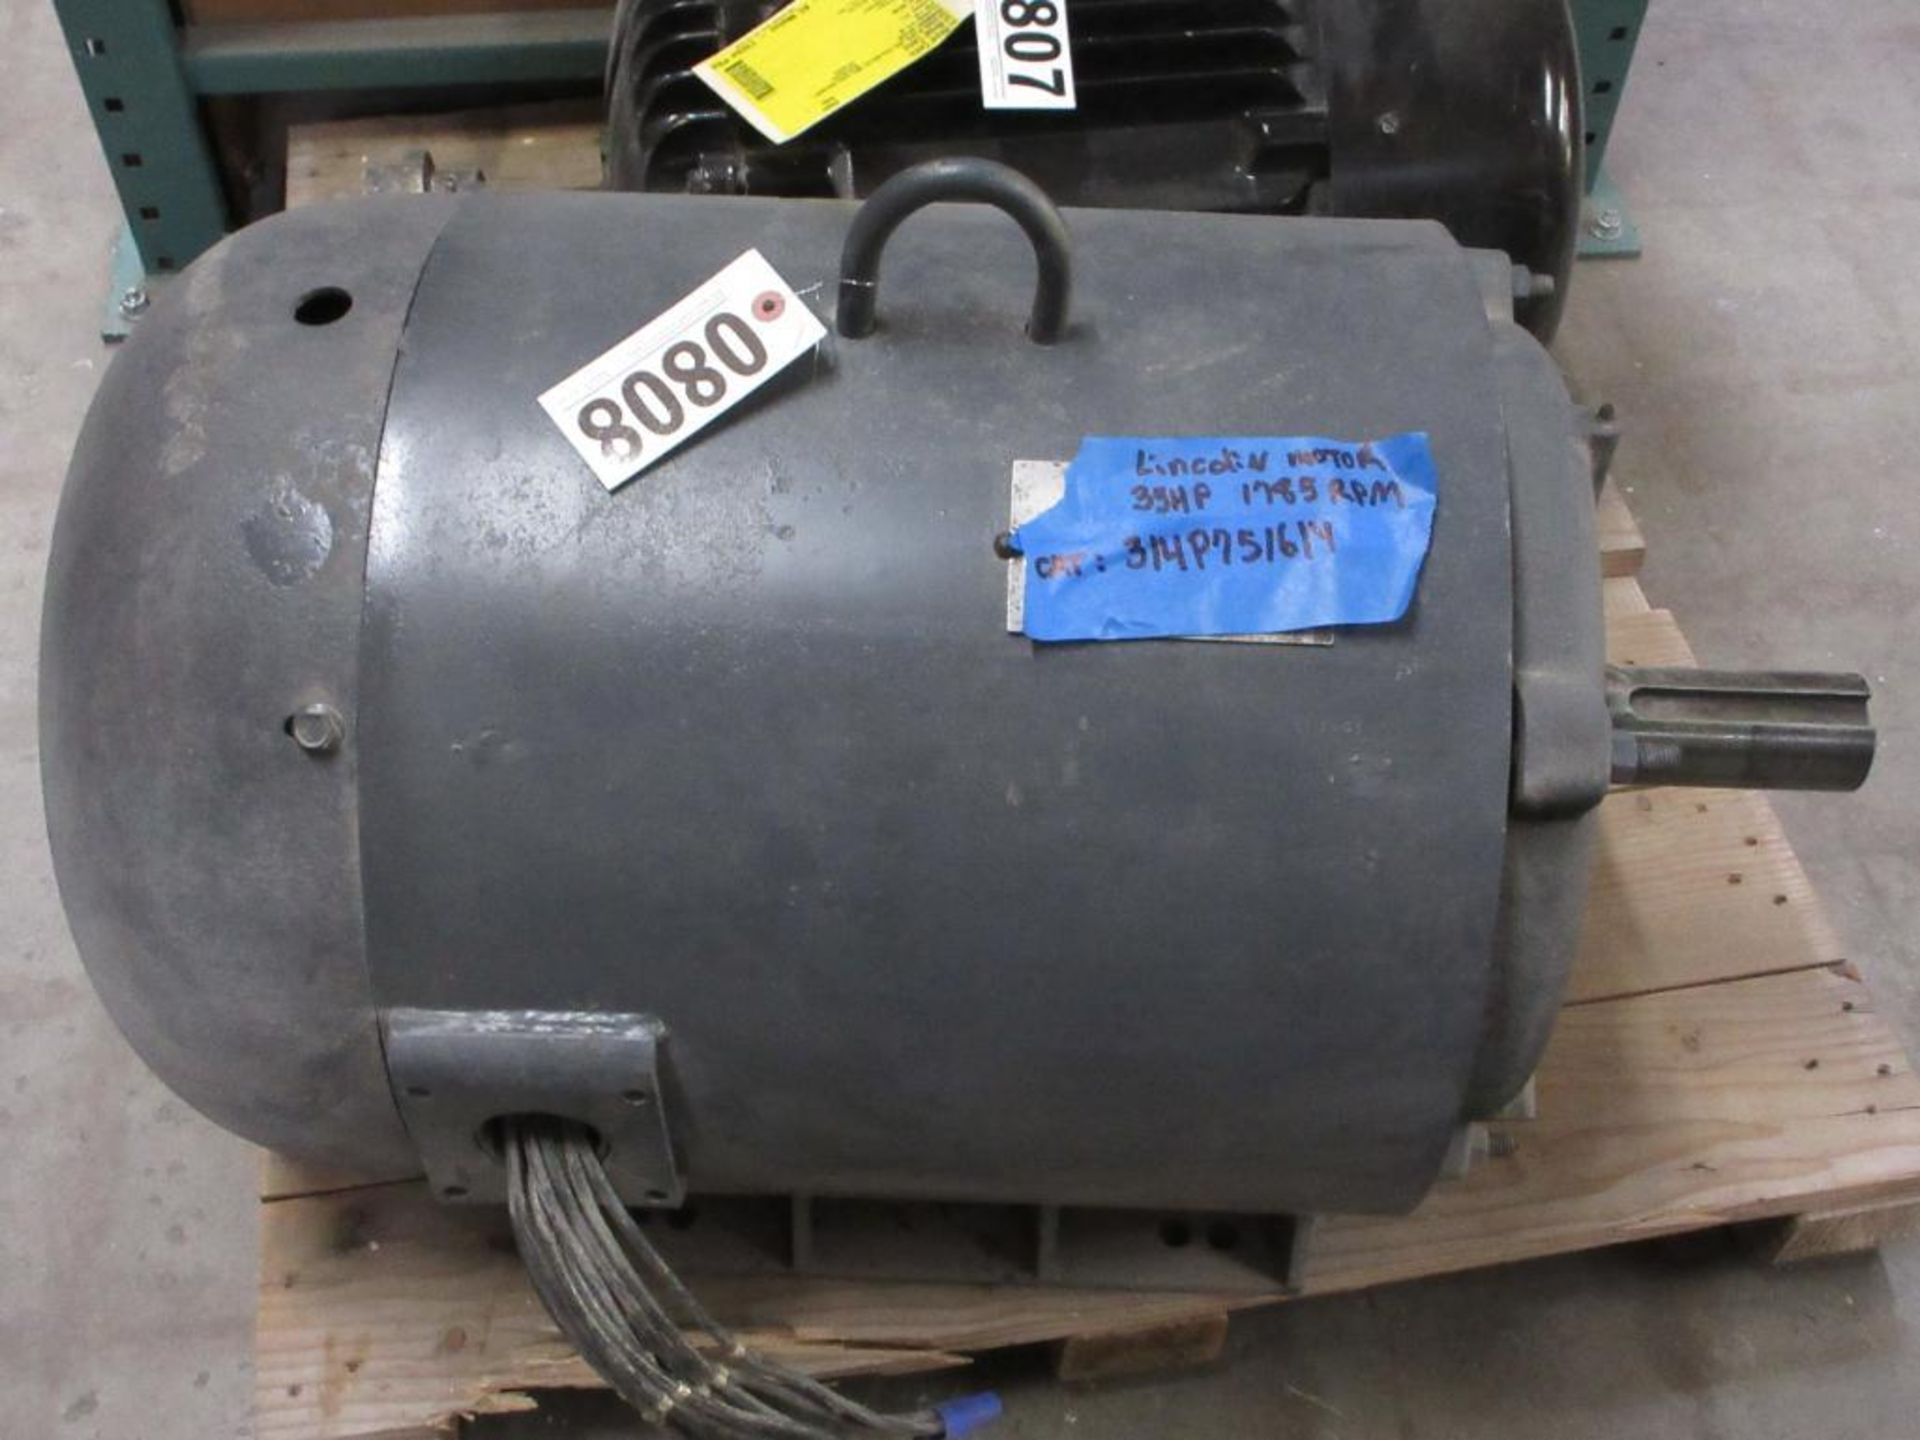 LINCOLN 314P75161Y 35HP 1785RPM 3 PHASE ELECTRIC MOTOR (THIS LOT IS FOB CAMARILLO CA) - (There will